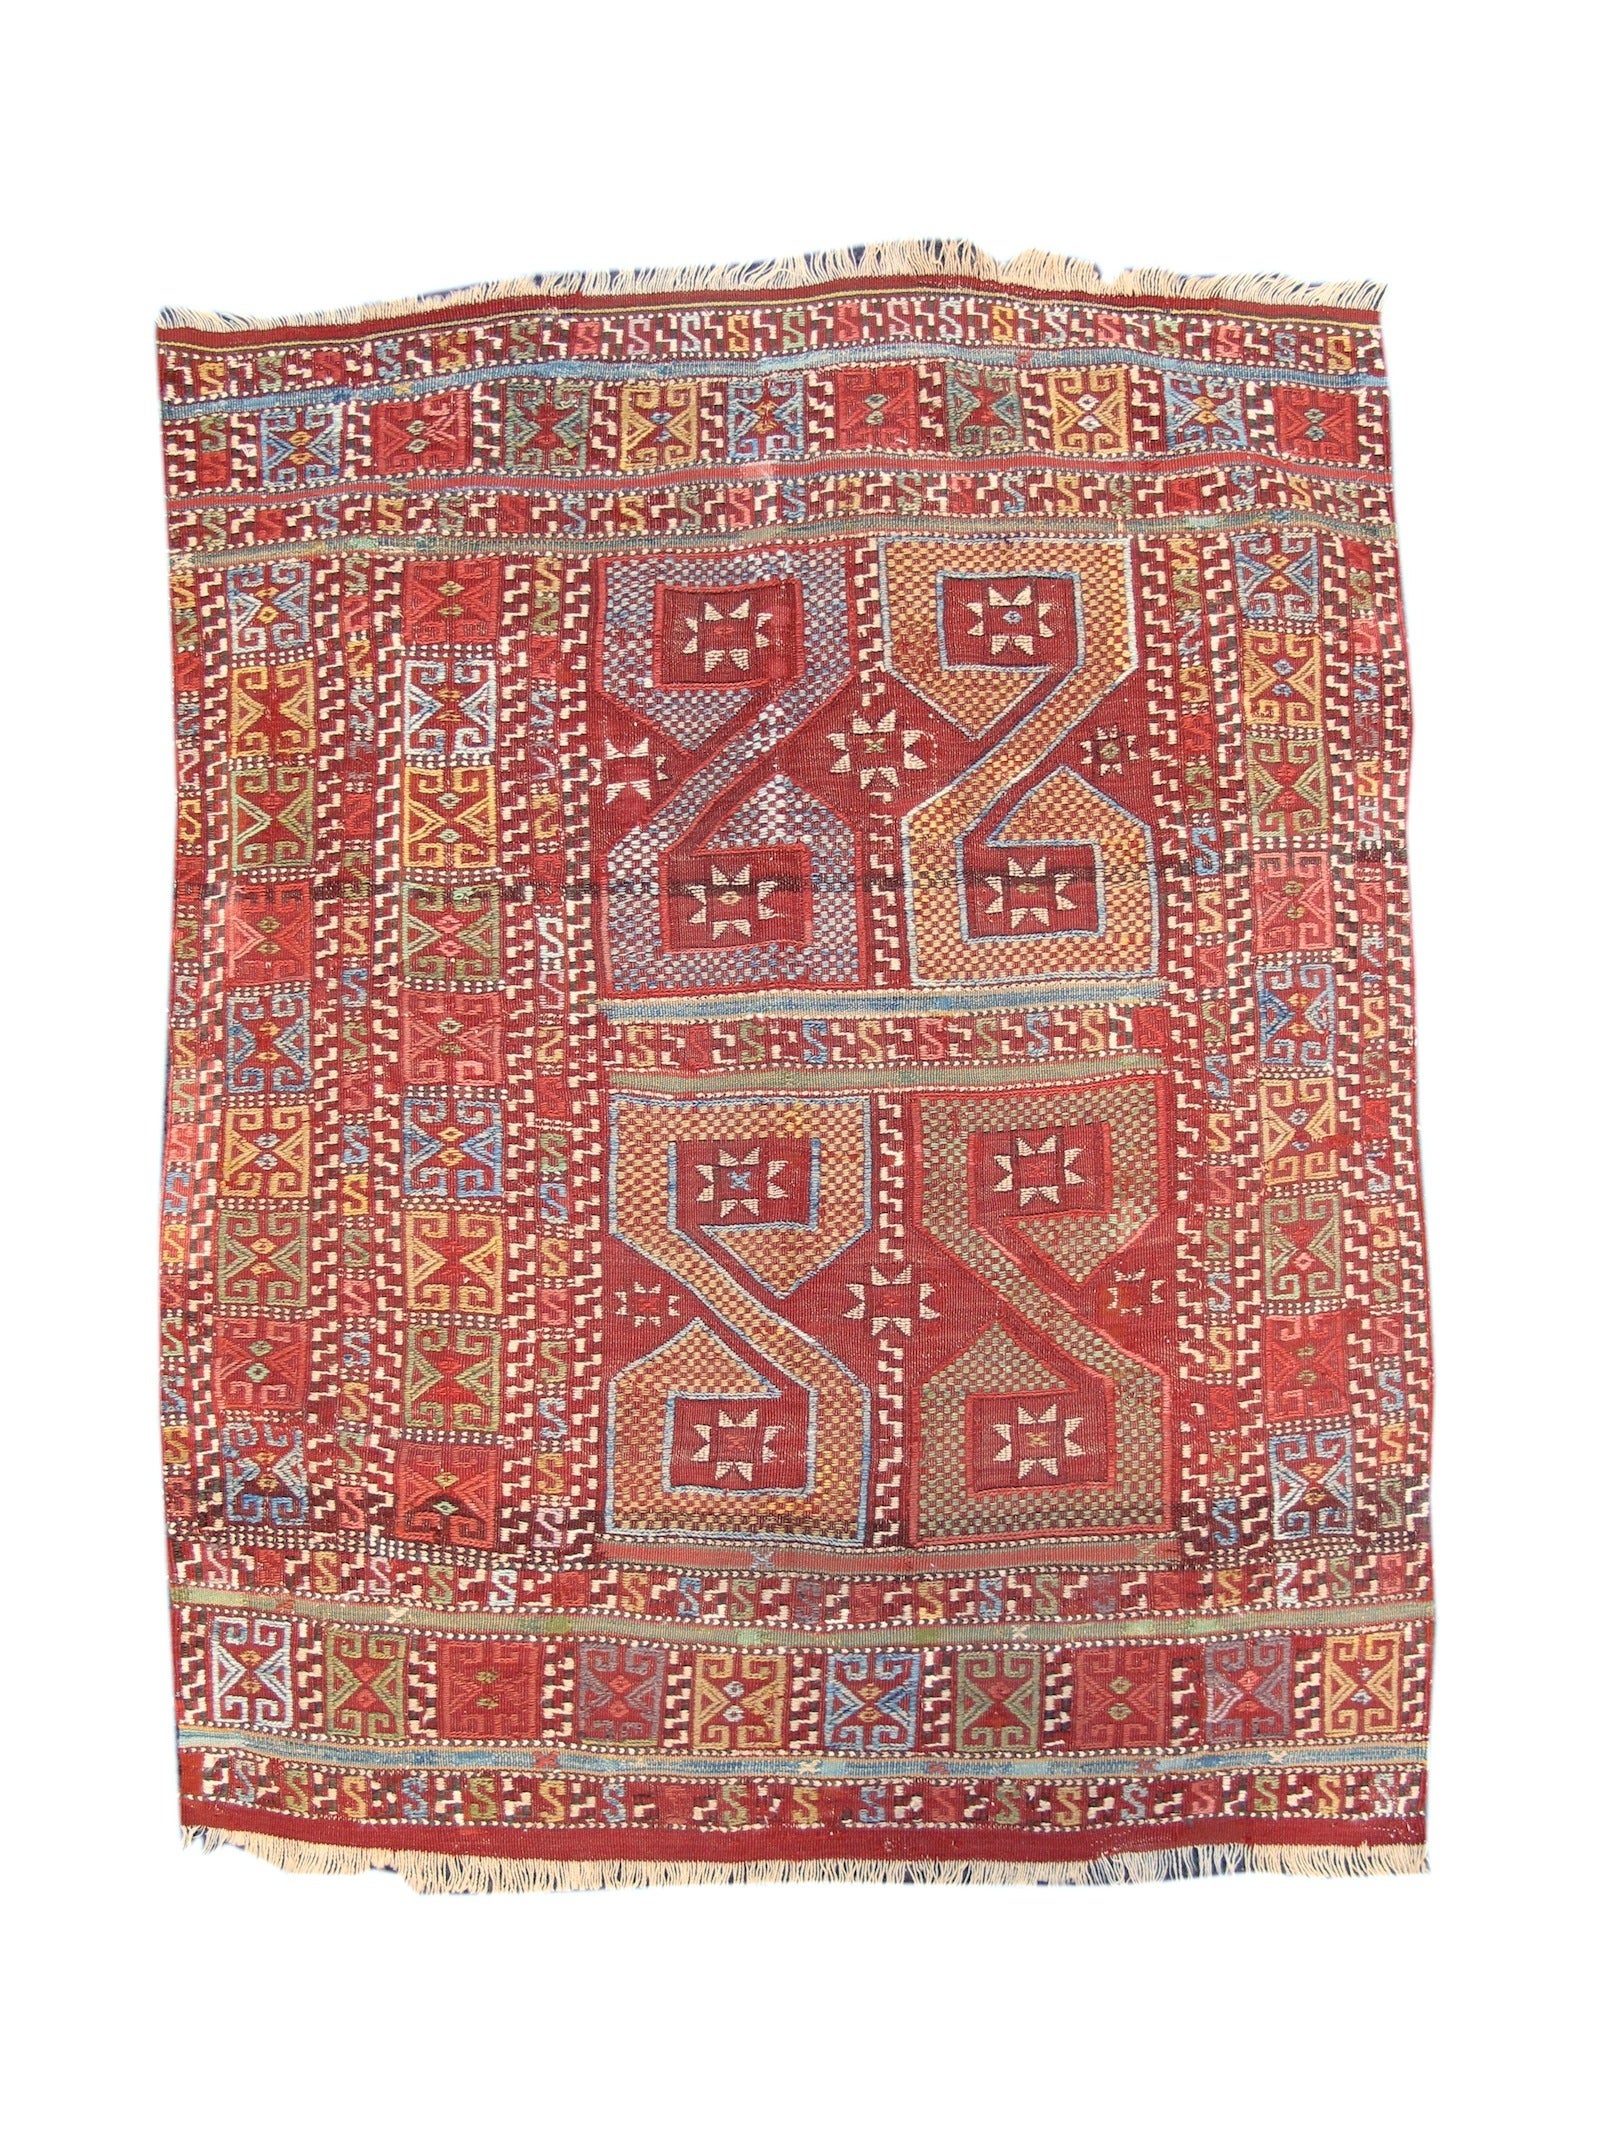 Antique Red Turkish Jajim Flat-Weave Rug, Mid-19th Century  For Sale